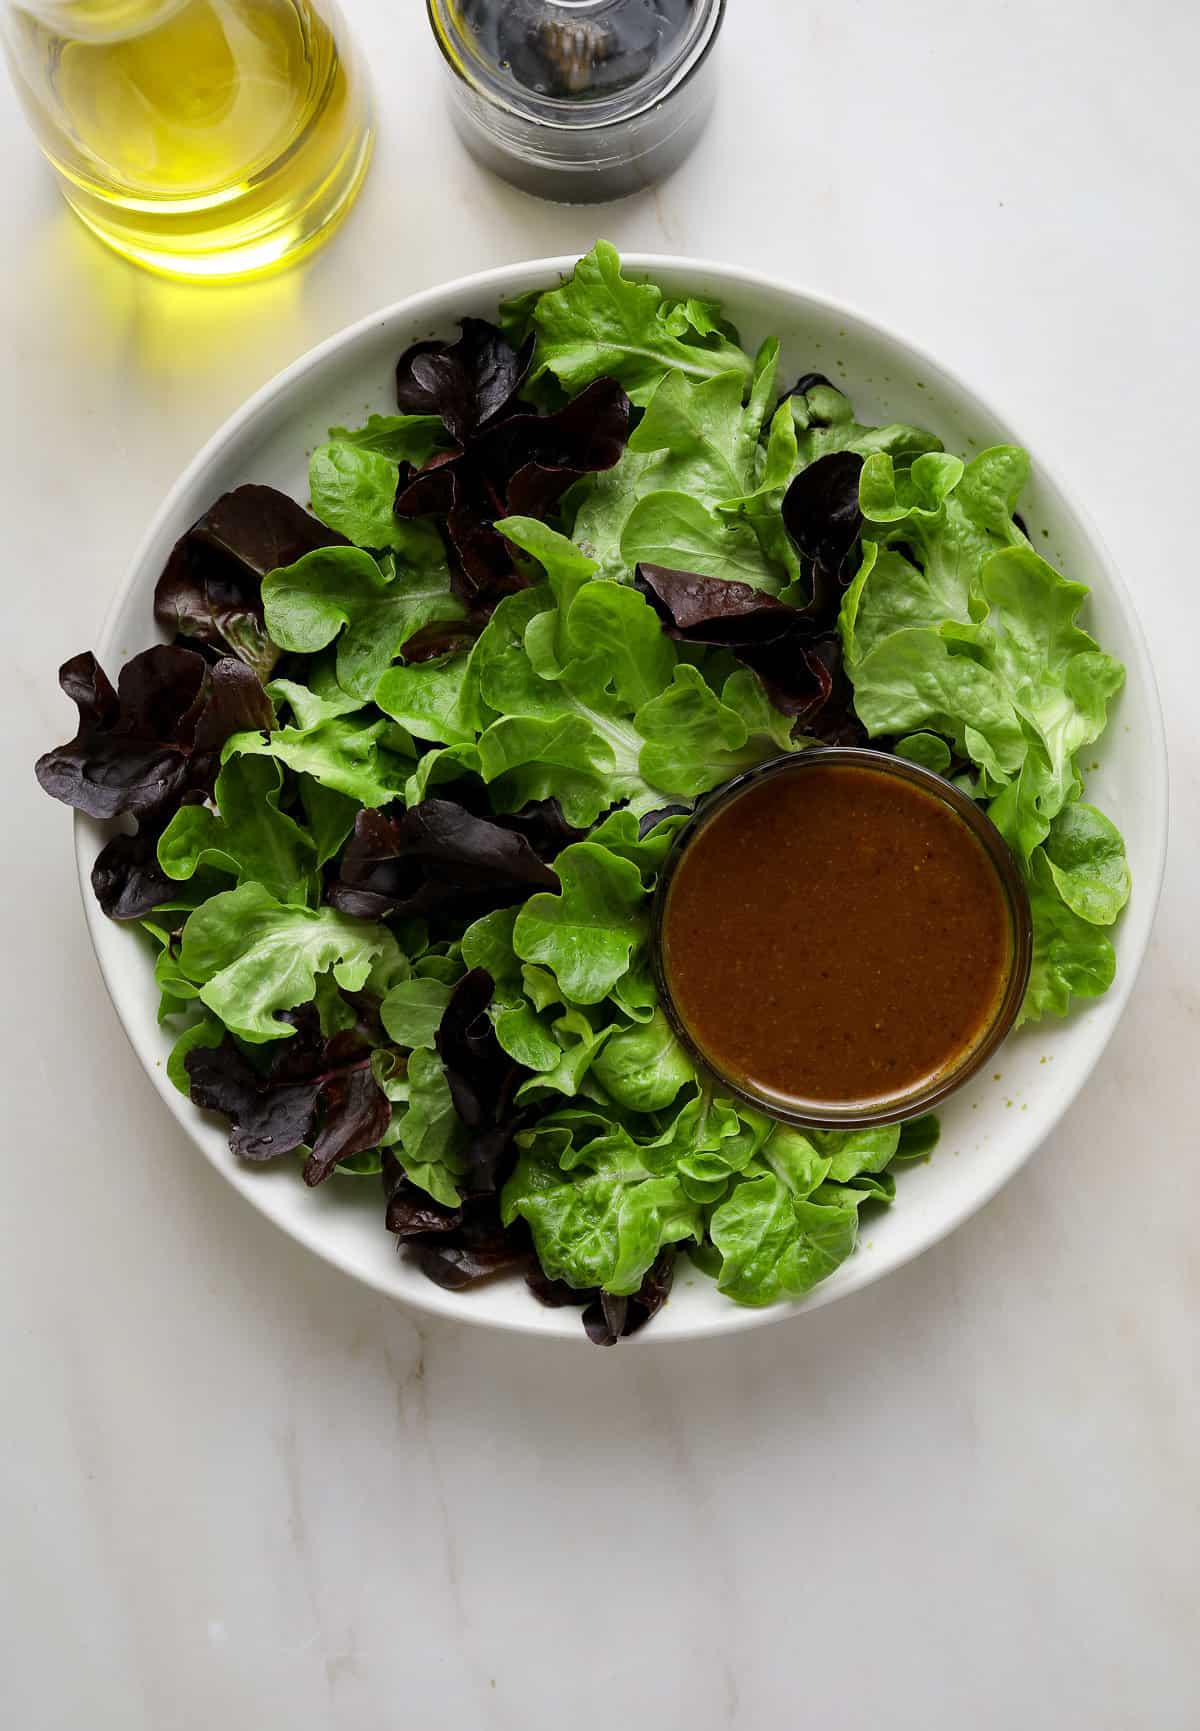 A bowl of bright green and purple lettuces with a small dish of vinaigrette salad dressing.